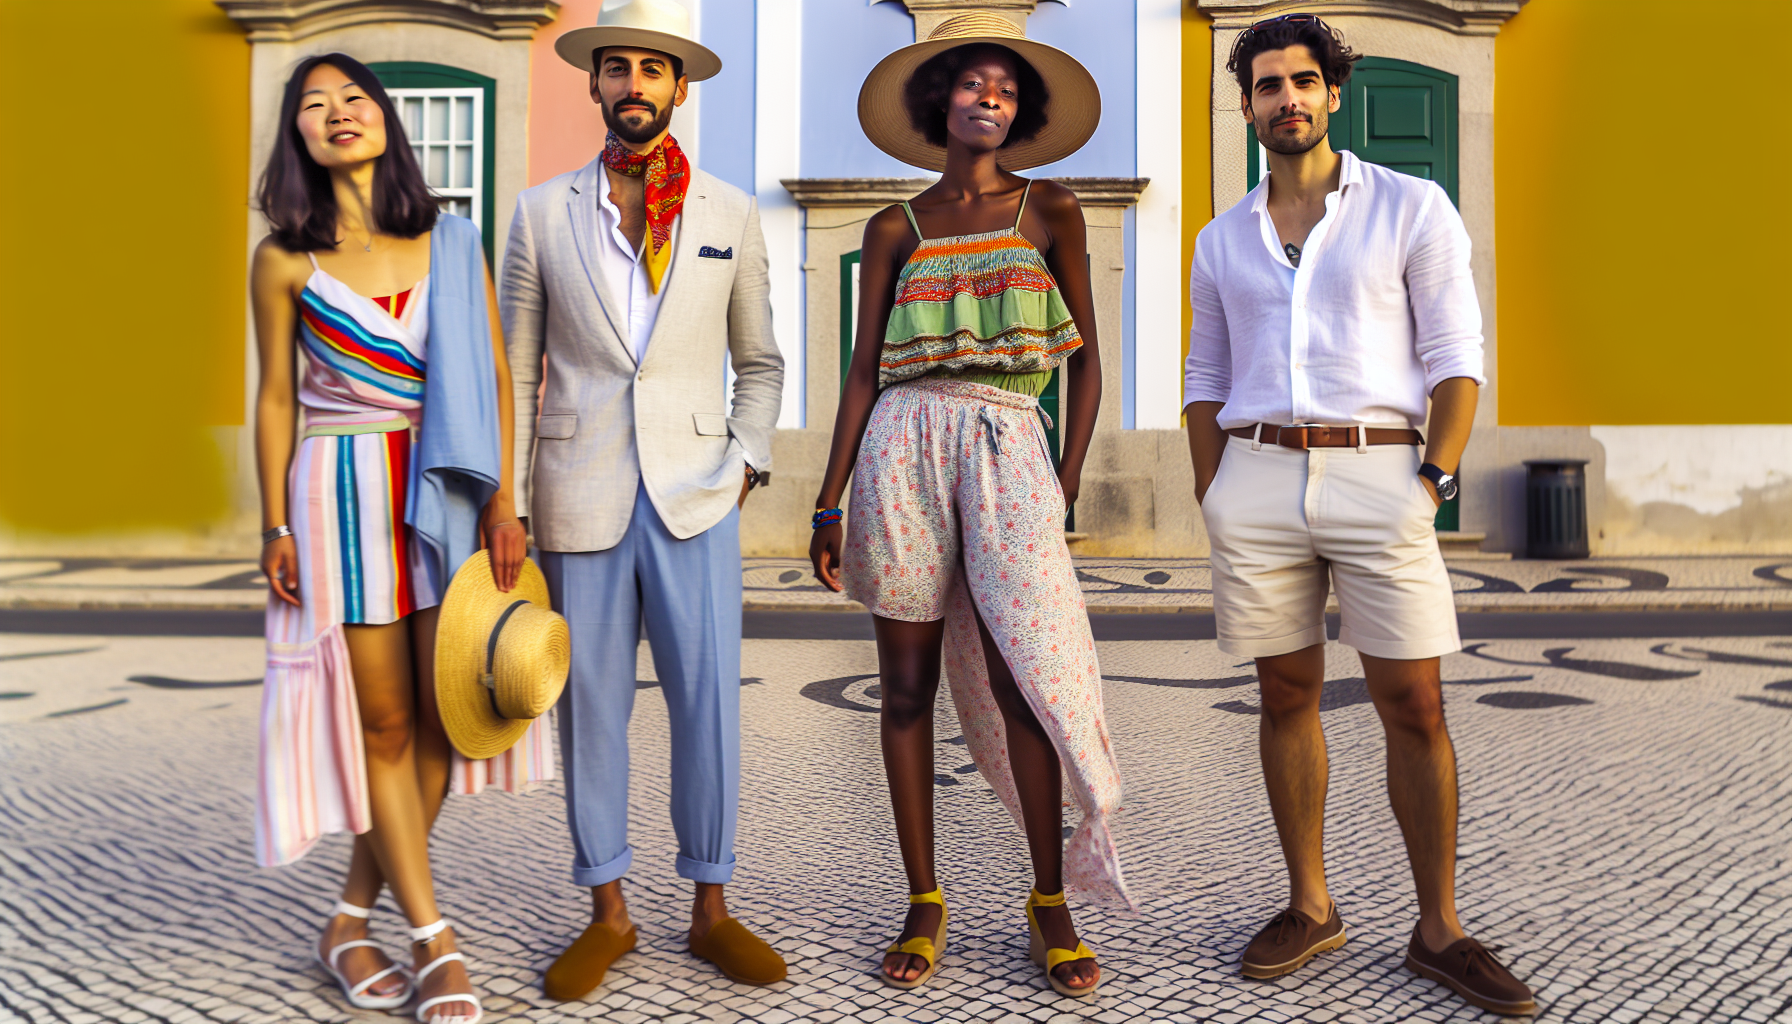 Stylish clothing for cultural events and daytime explorations in Portugal